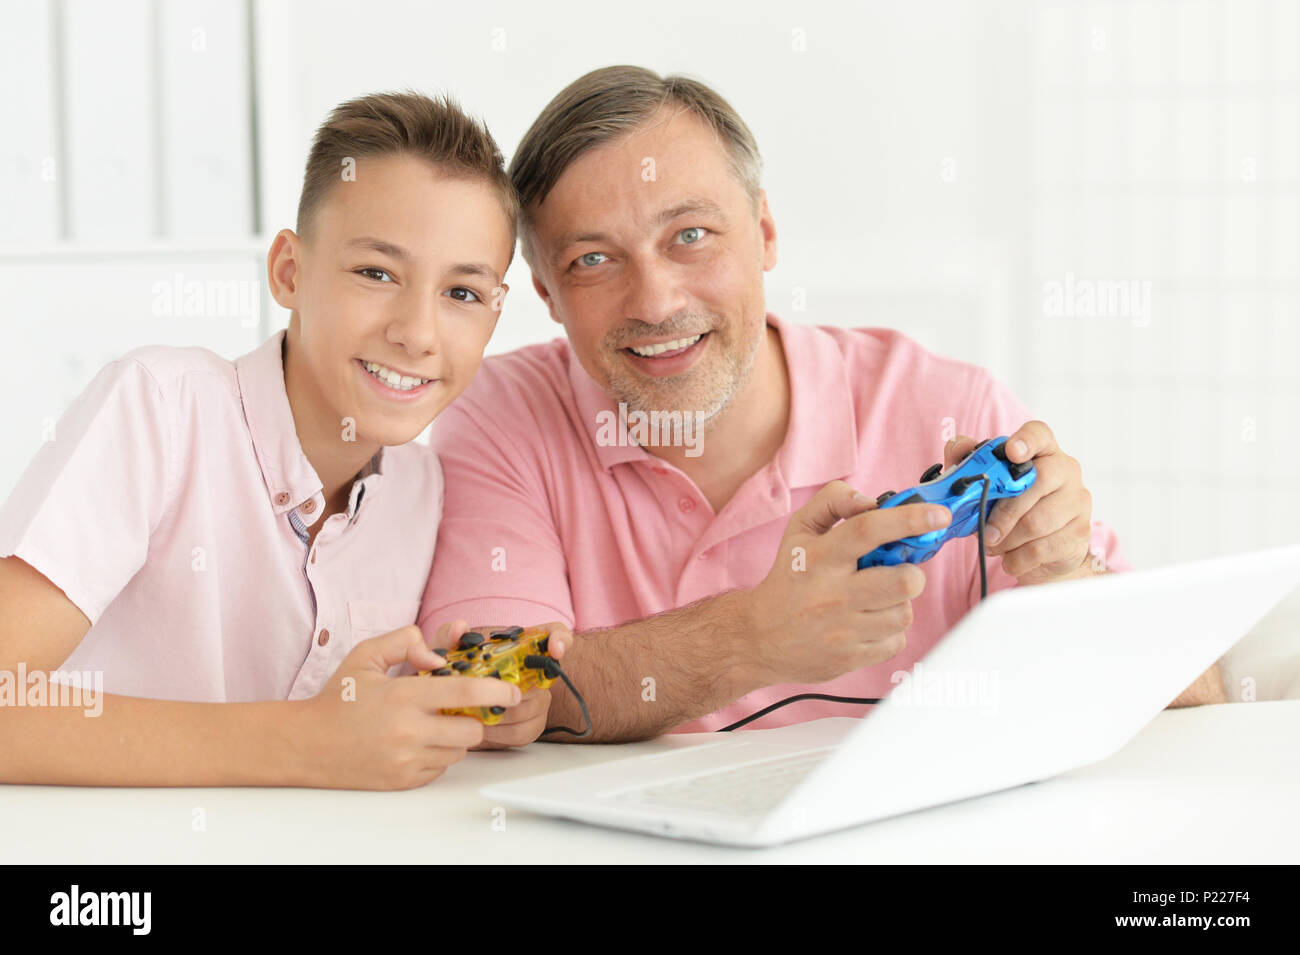 portrait of happy father and son playing Stock Photo